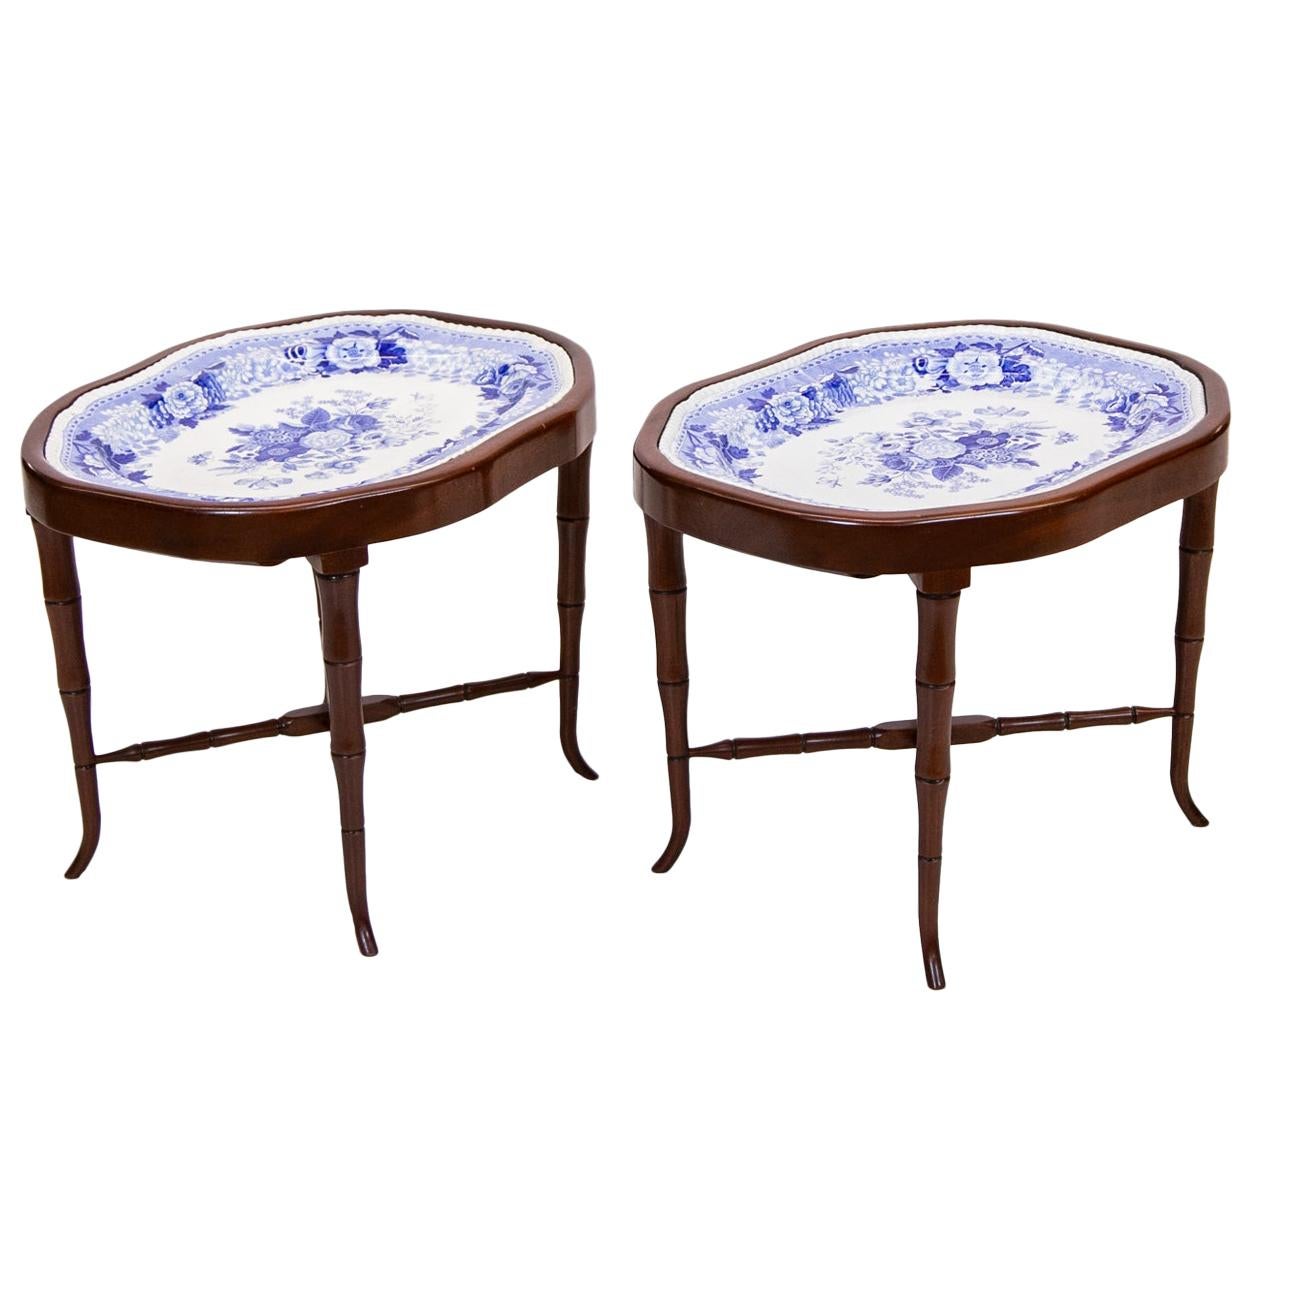 Pair of Staffordshire Tray Tables